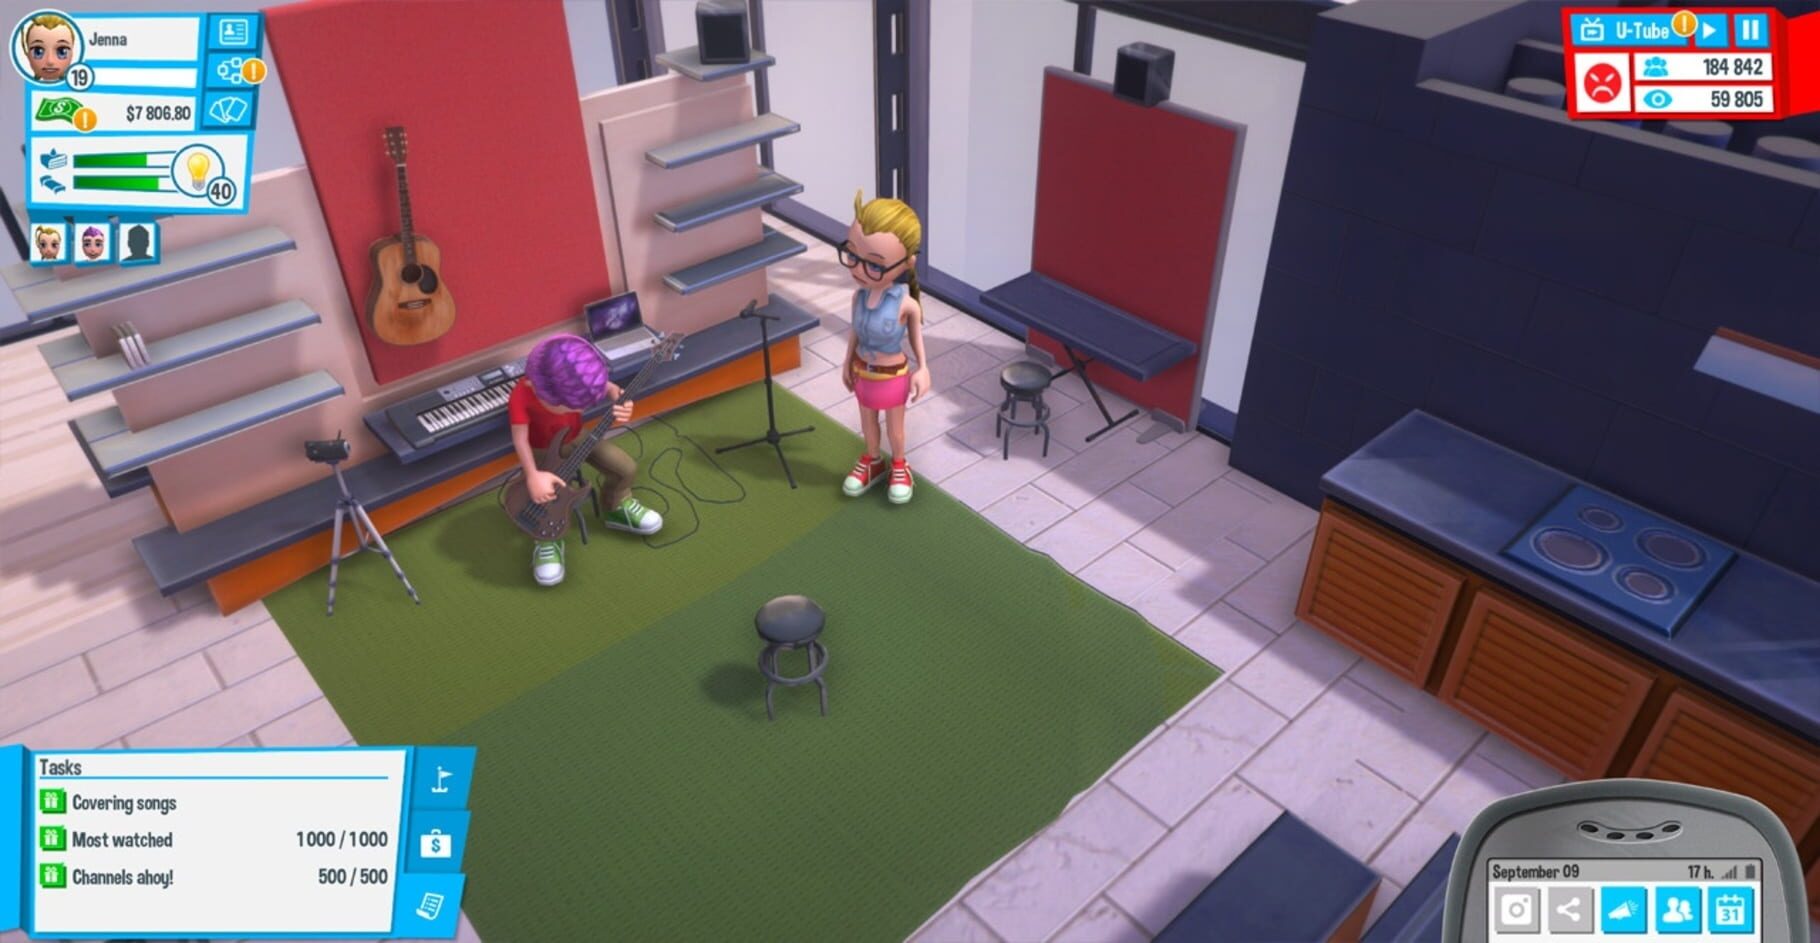 youtubers life 2 release date